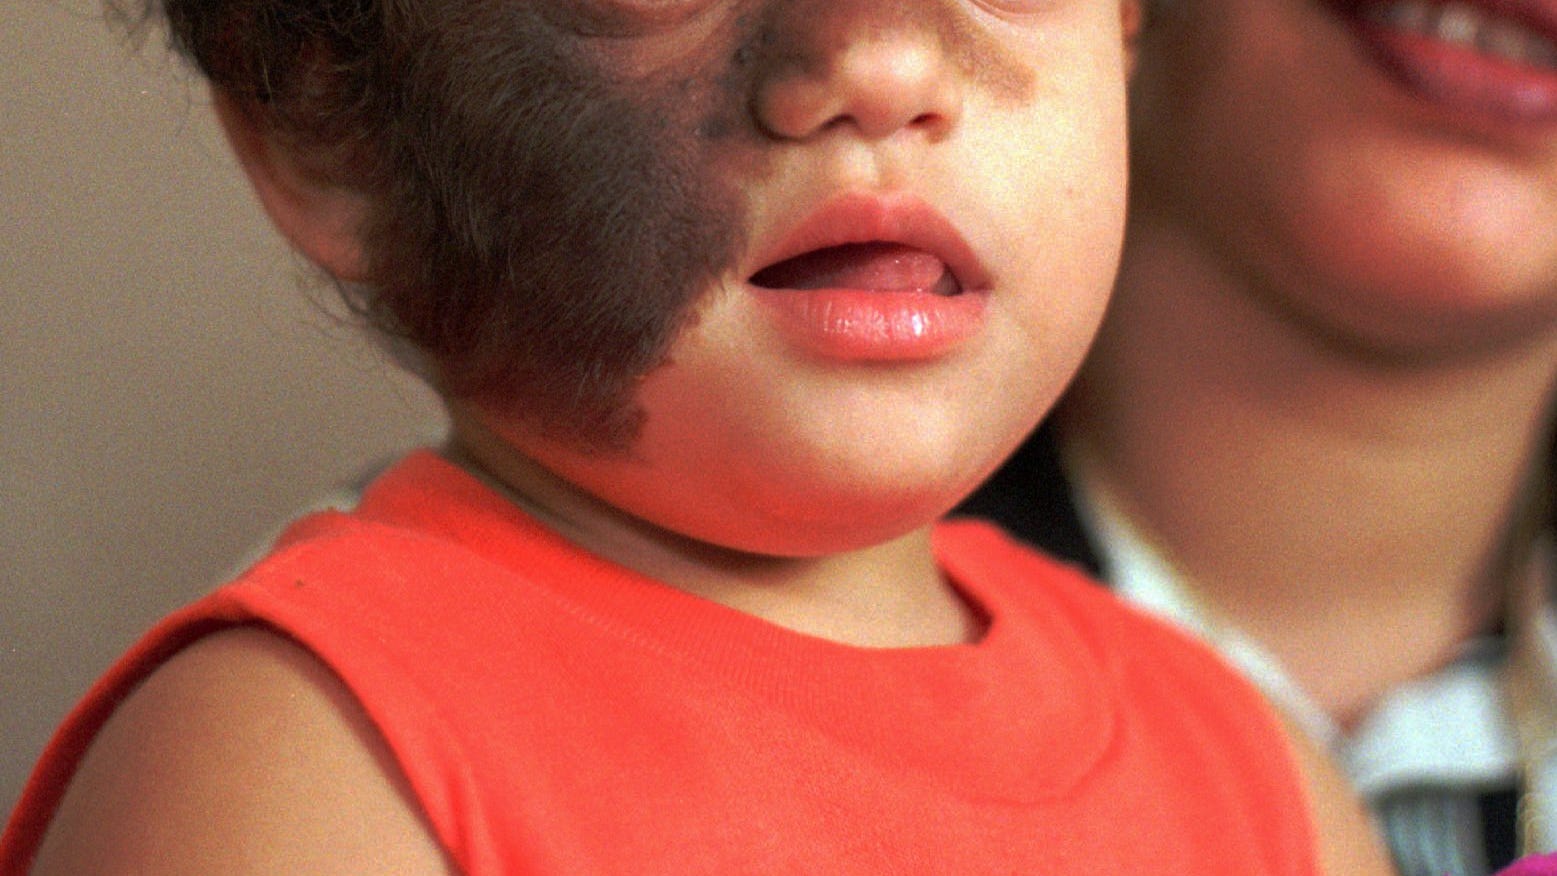 Werewolf syndrome' affects babies in after medication mix-up